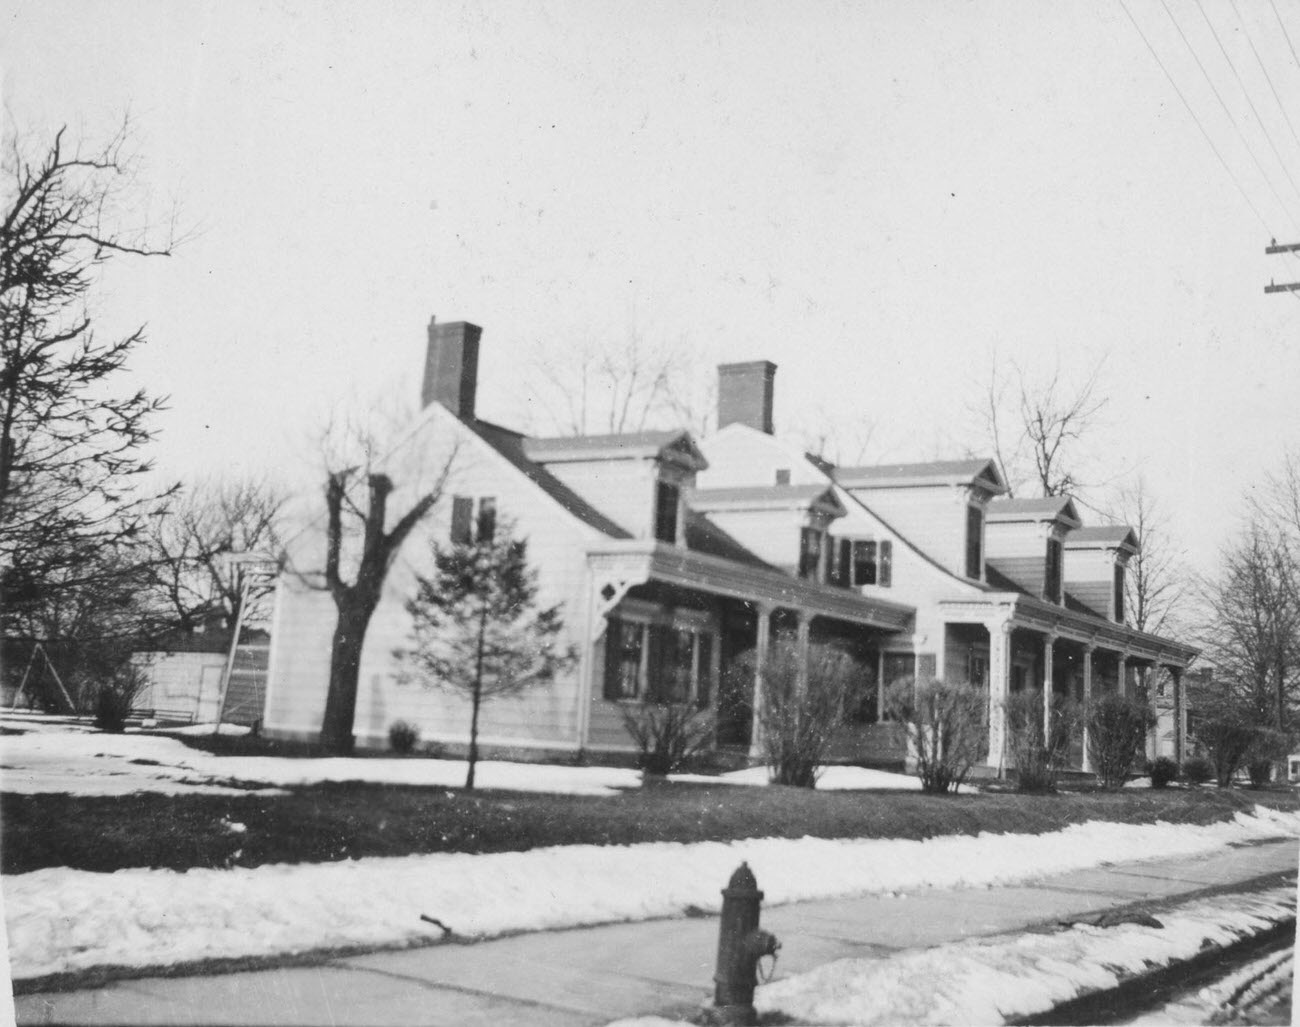 Andrew Suydam House, Built C. 1700. West Side Of Flatbush Avenue Near The Junction Of Ditmas Avenue, Demolished 1911, New York, New York, Late 19Th Or Early 20Th Century.